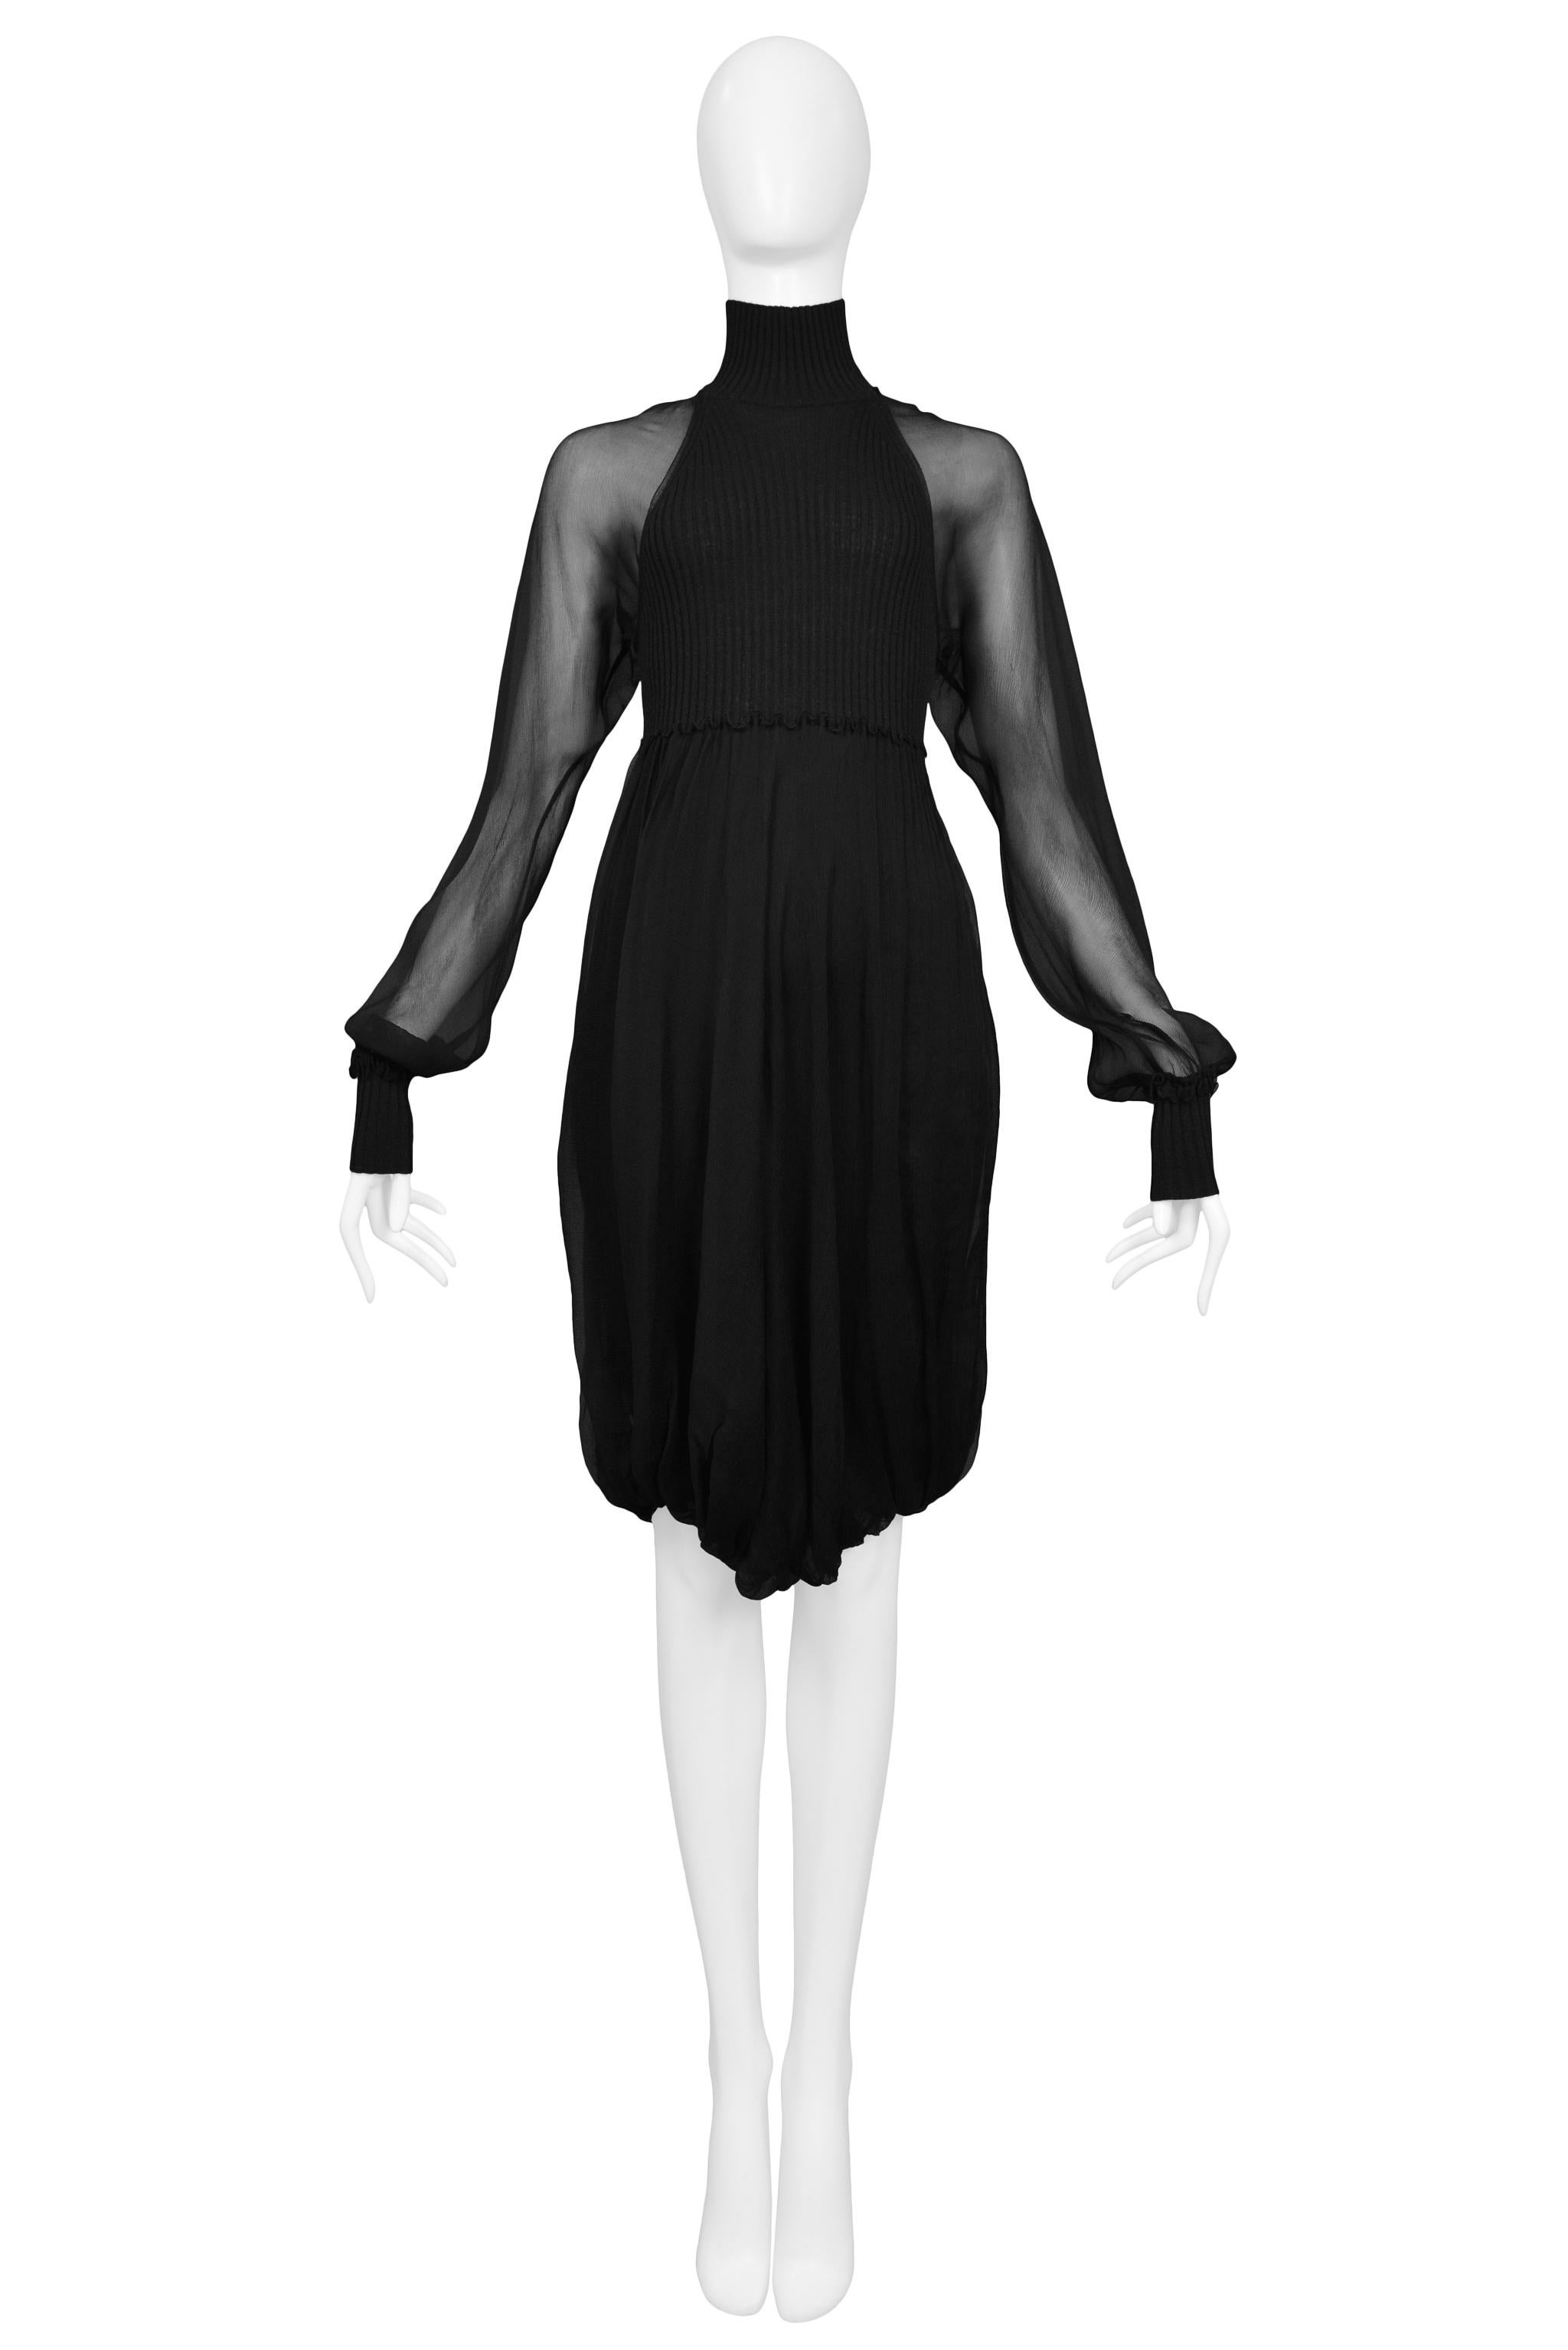 Resurrection Vintage is excited to offer a vintage Jean Paul Gaultier black illusion dress featuring sheer chiffon sleeves, a high neck, ribbed bodice, and cuffs, and draped skirt.

Jean Paul Gaultier
Size: Small 
80% Wool , 20% Nylon
Excellent